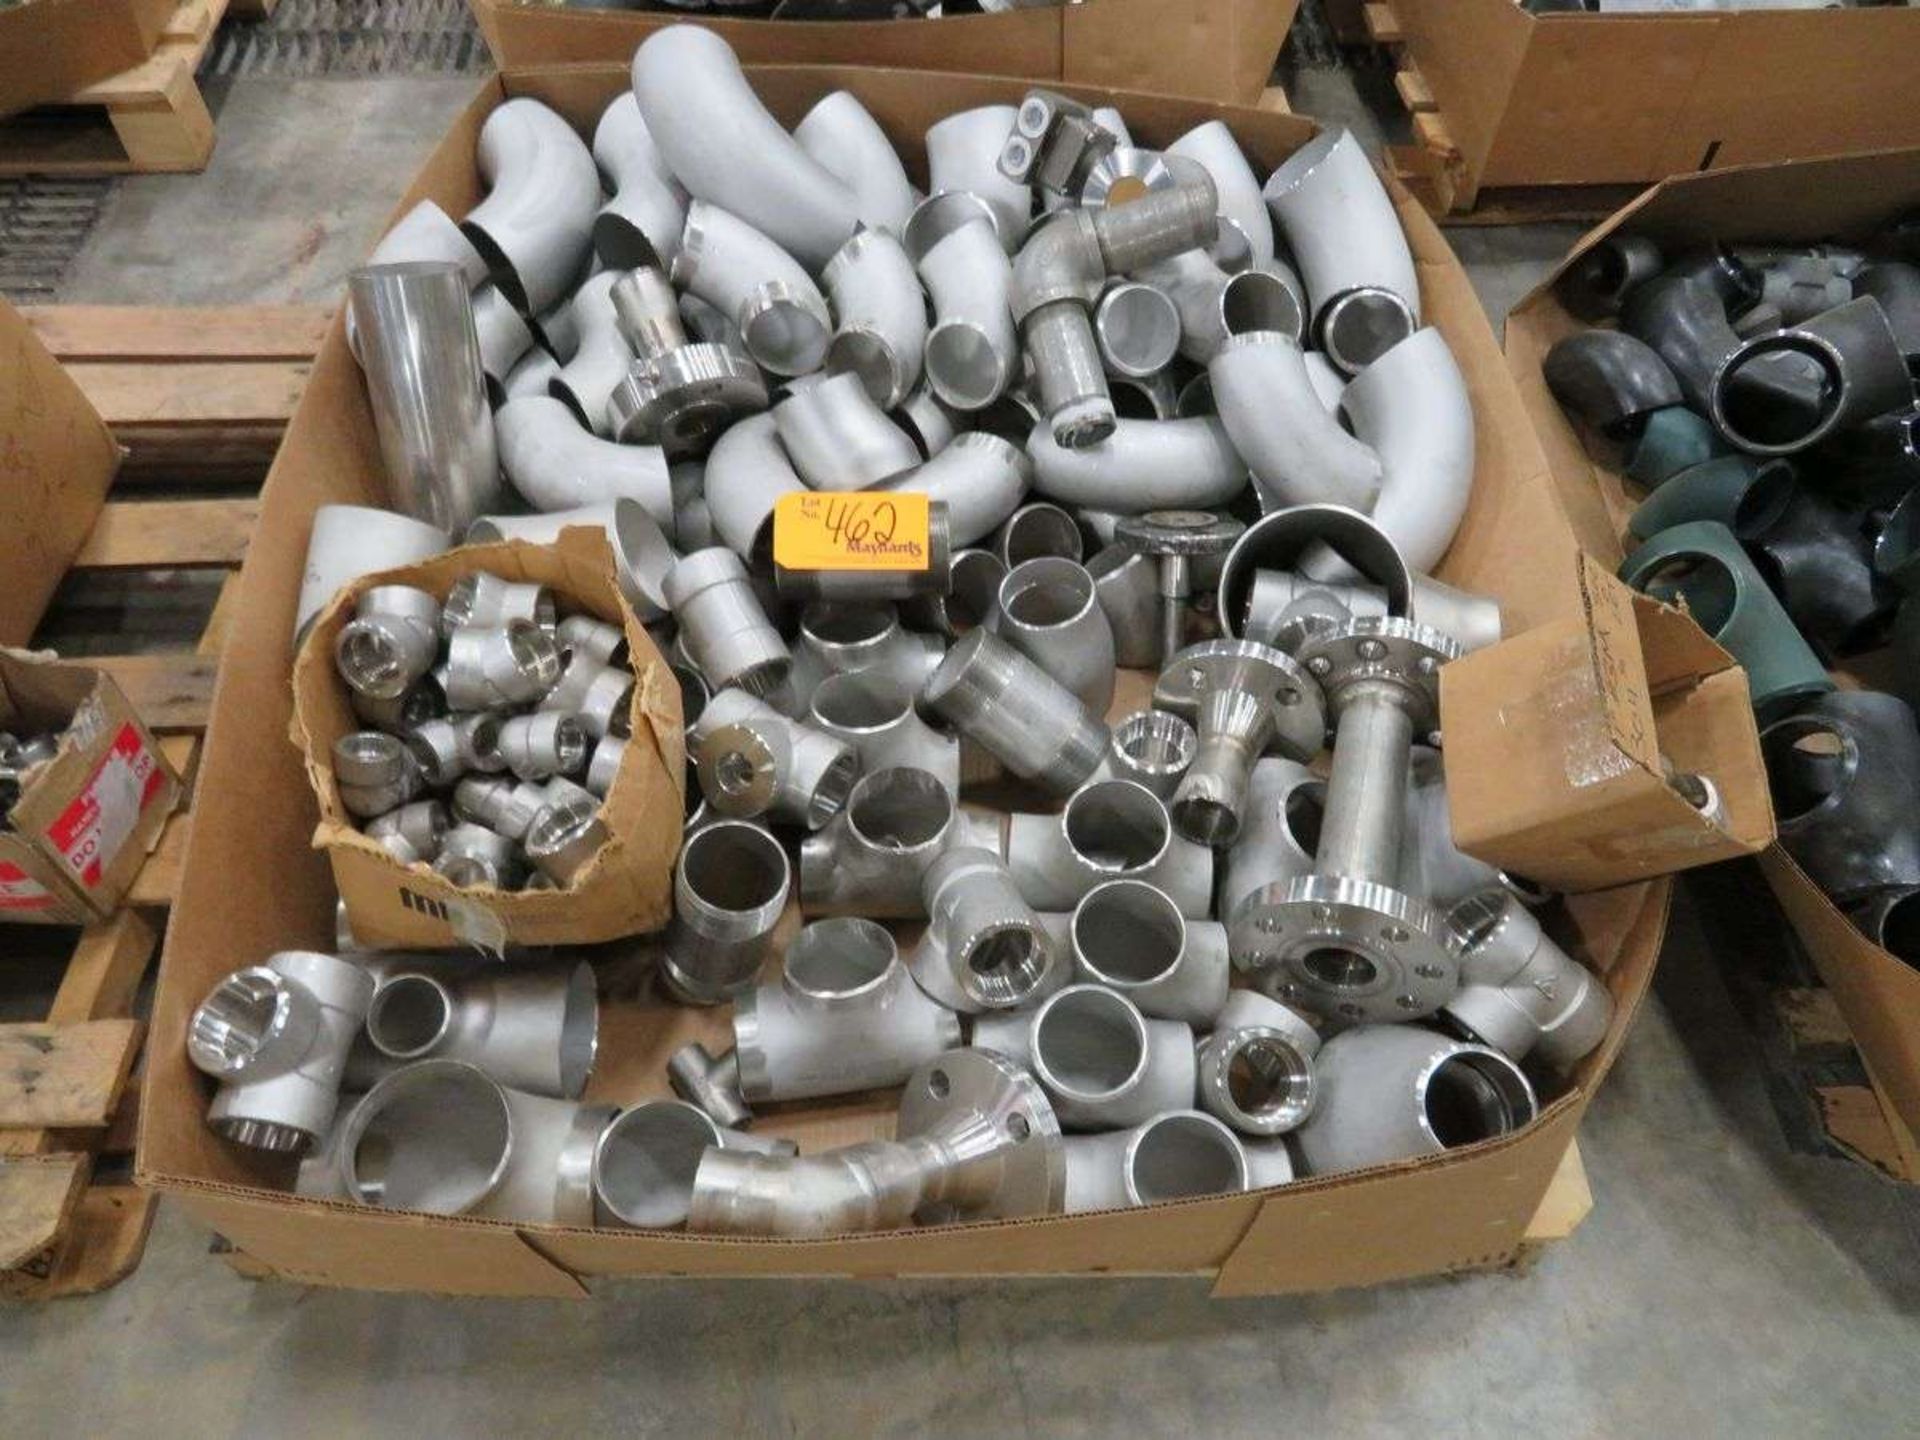 (10) Pallets of Assorted Pipe Fittings, Couplings, Support Clamps, High Pressure Fittings, Etc. - Bild 8 aus 11